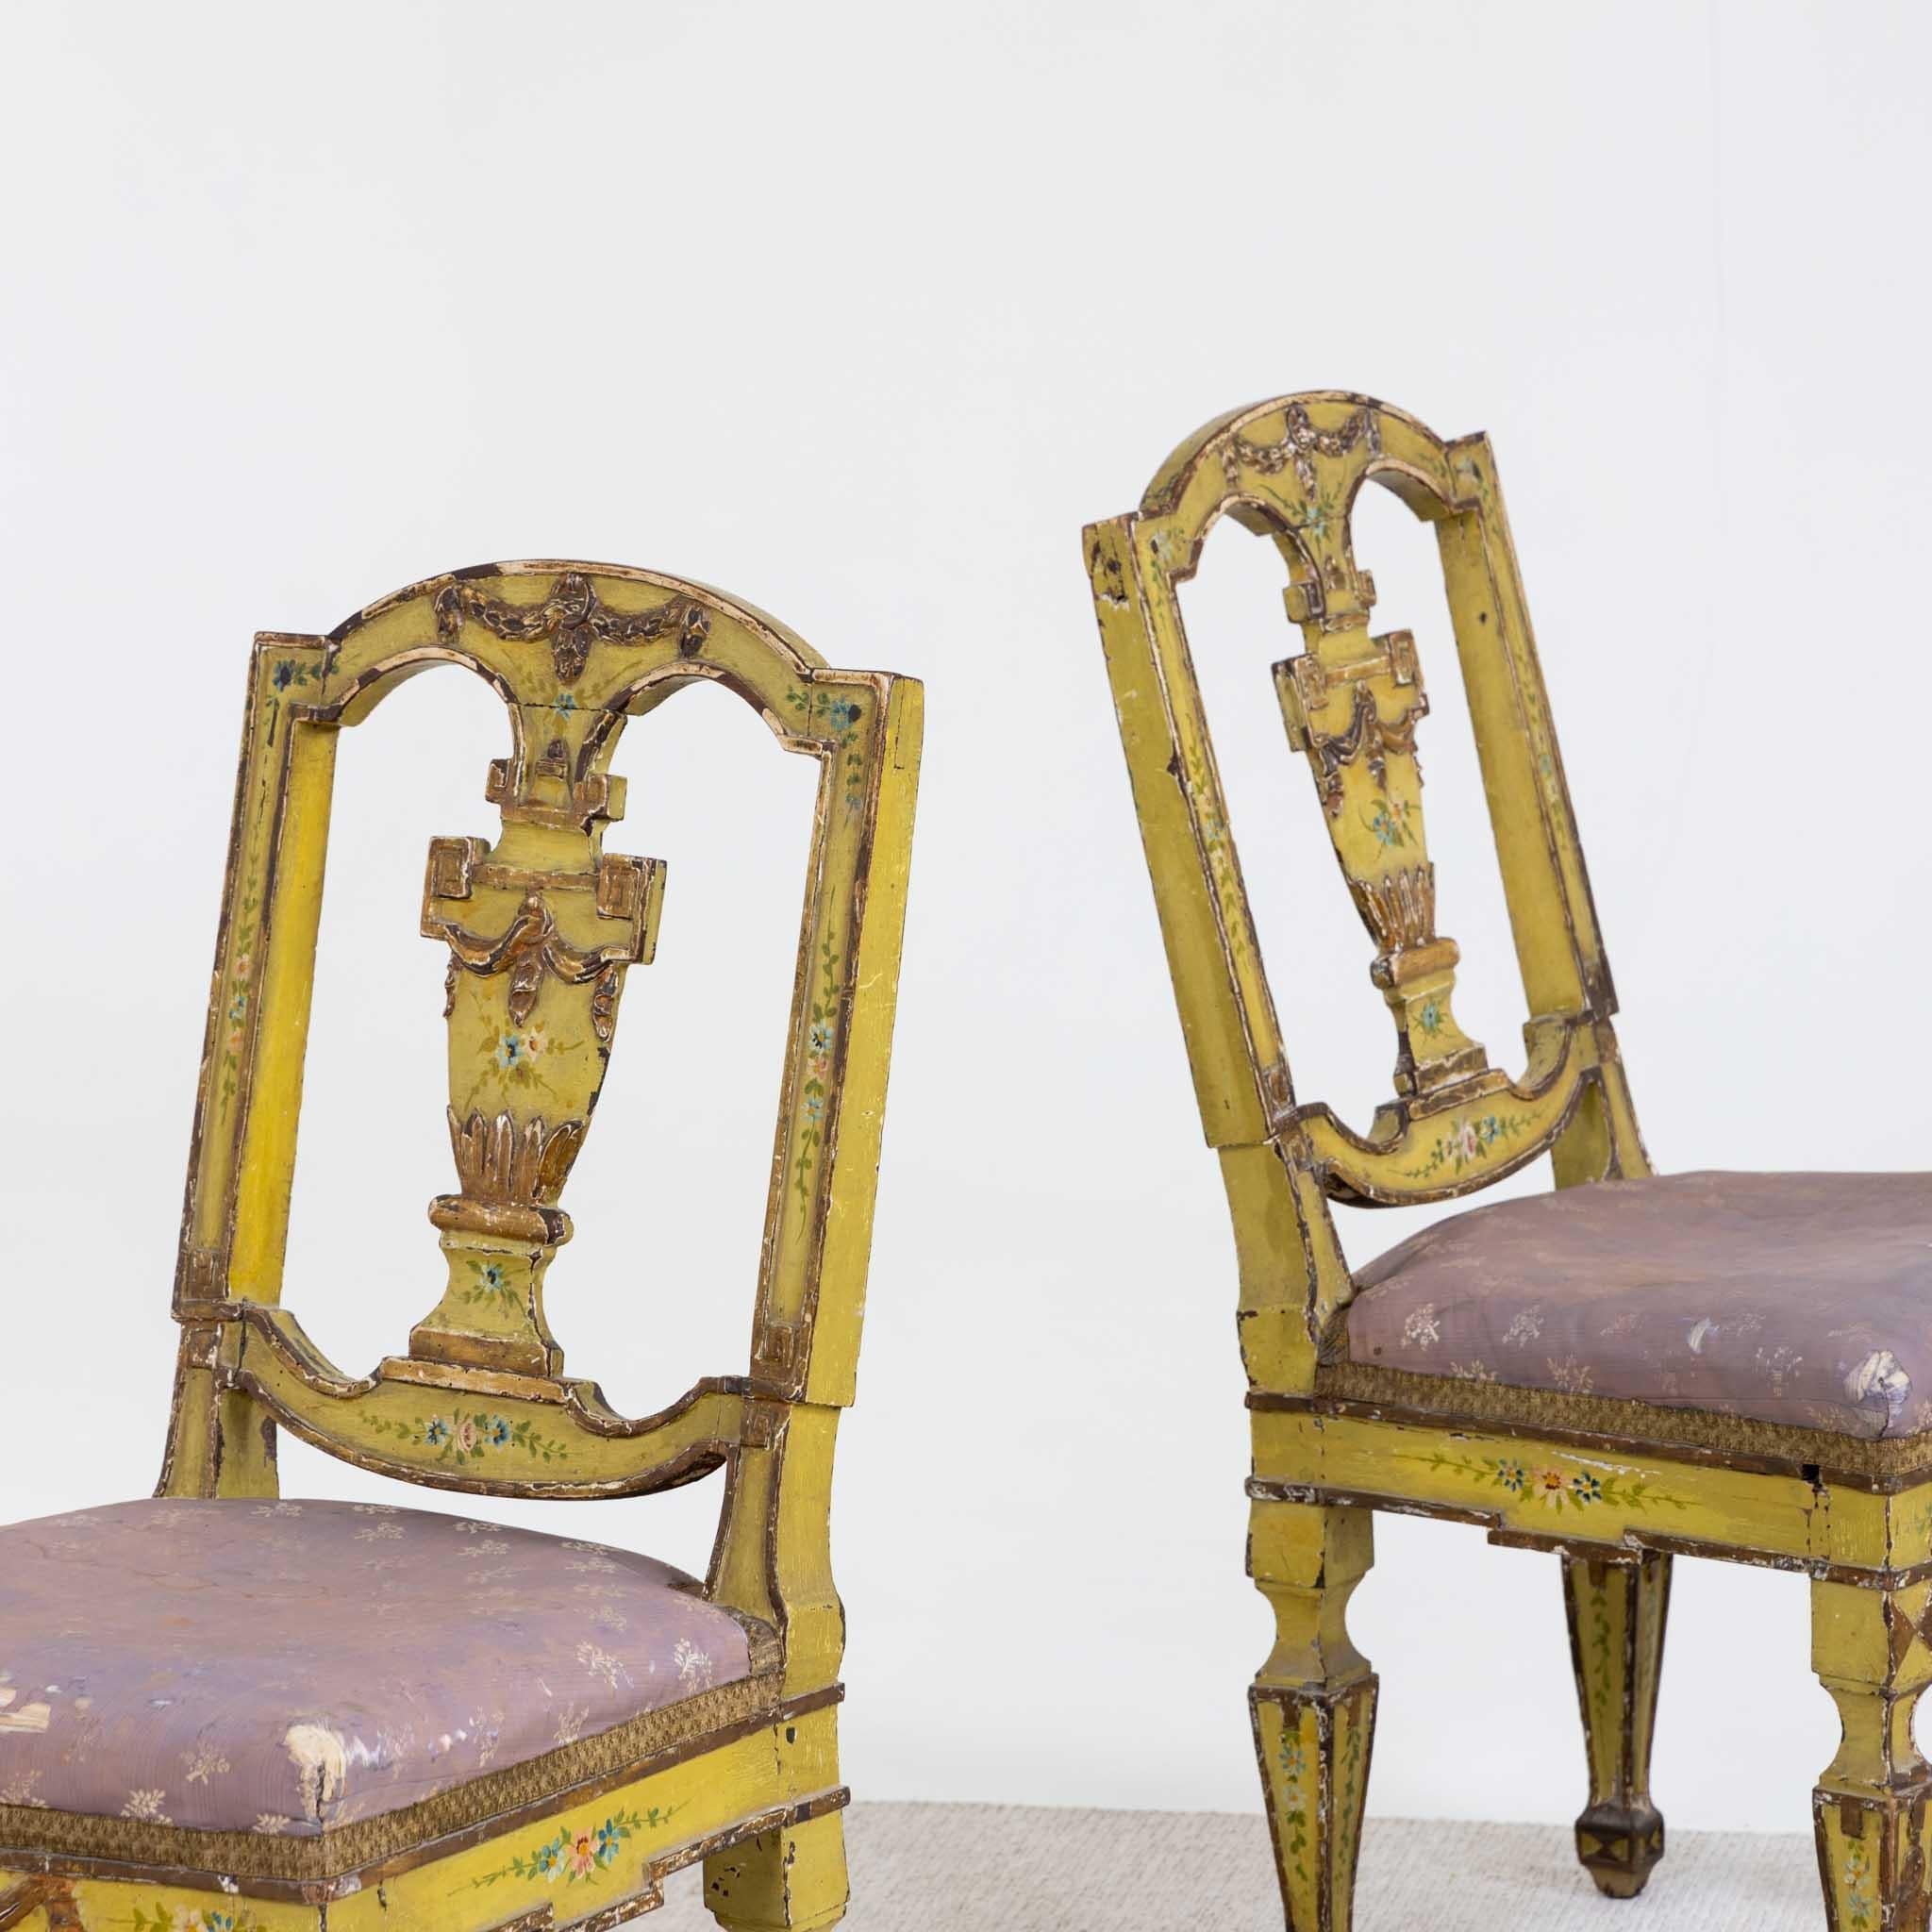 Pair of upholstered Venetian chairs on square-pointed legs with yellow-painted wooden frames with polychrome floral painting and festoons in relief. The backrest is designed as a lidded urn in the central bar. The chairs are in an unrestored